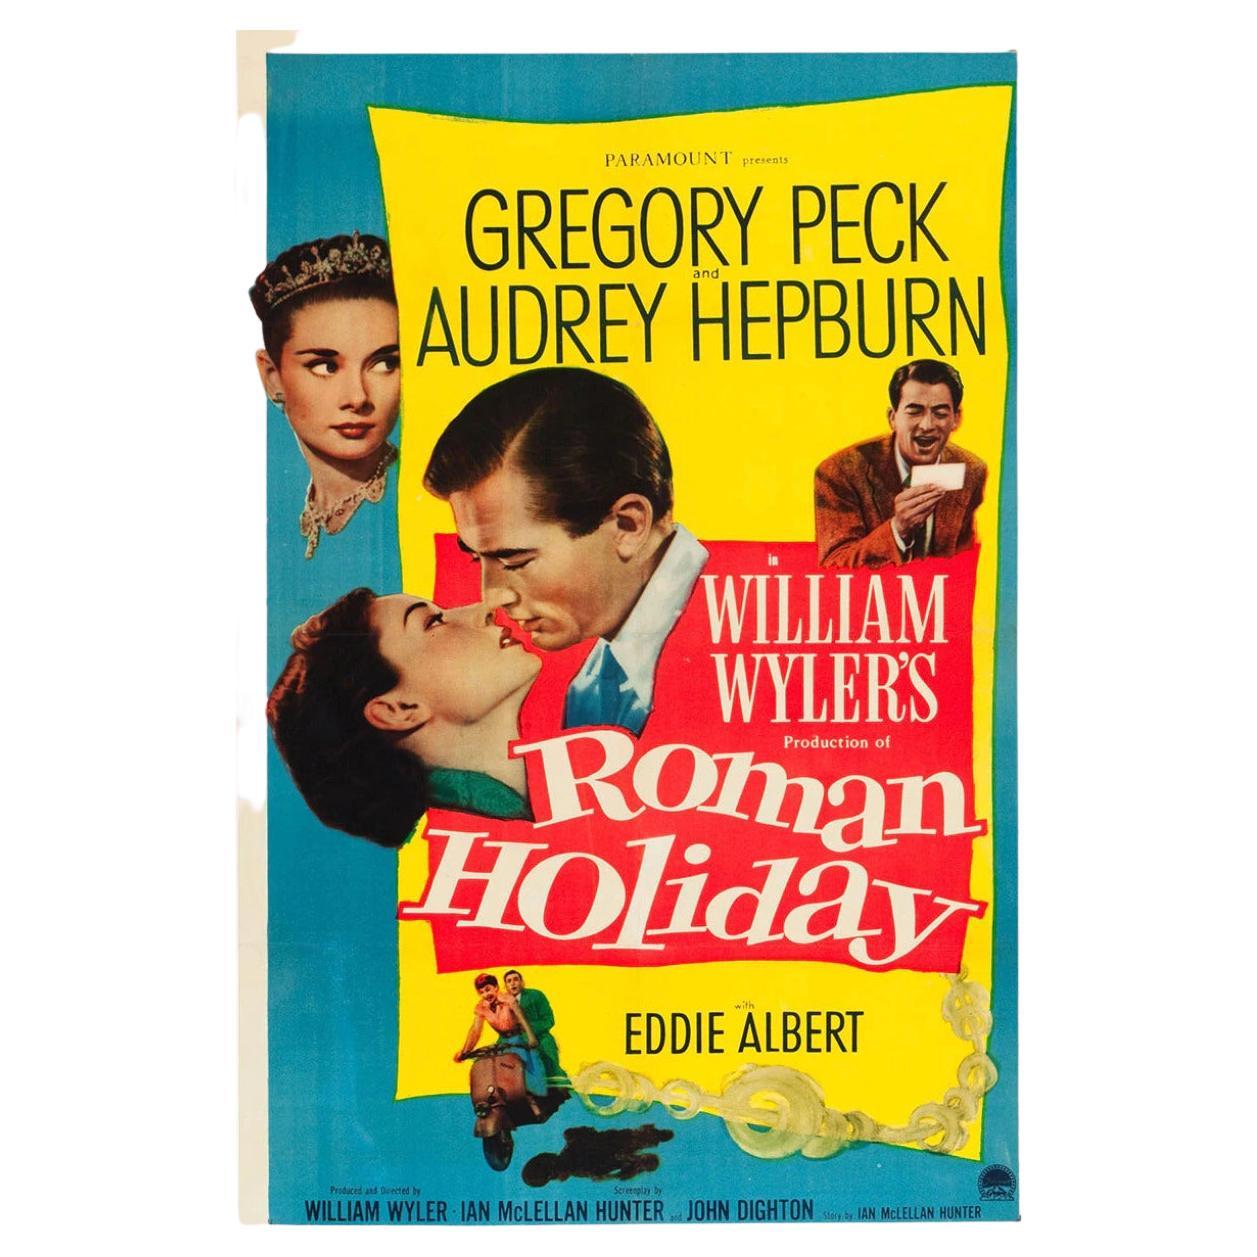 The original 1953 US One Sheet for the Gregory Peck and Audrey Hepburn classic Roman Holiday, directed by William Wyler. This wonderful romantic comedy is the film that catapulted Hepburn to fame and earned her an Academy Award and is linen-backed.